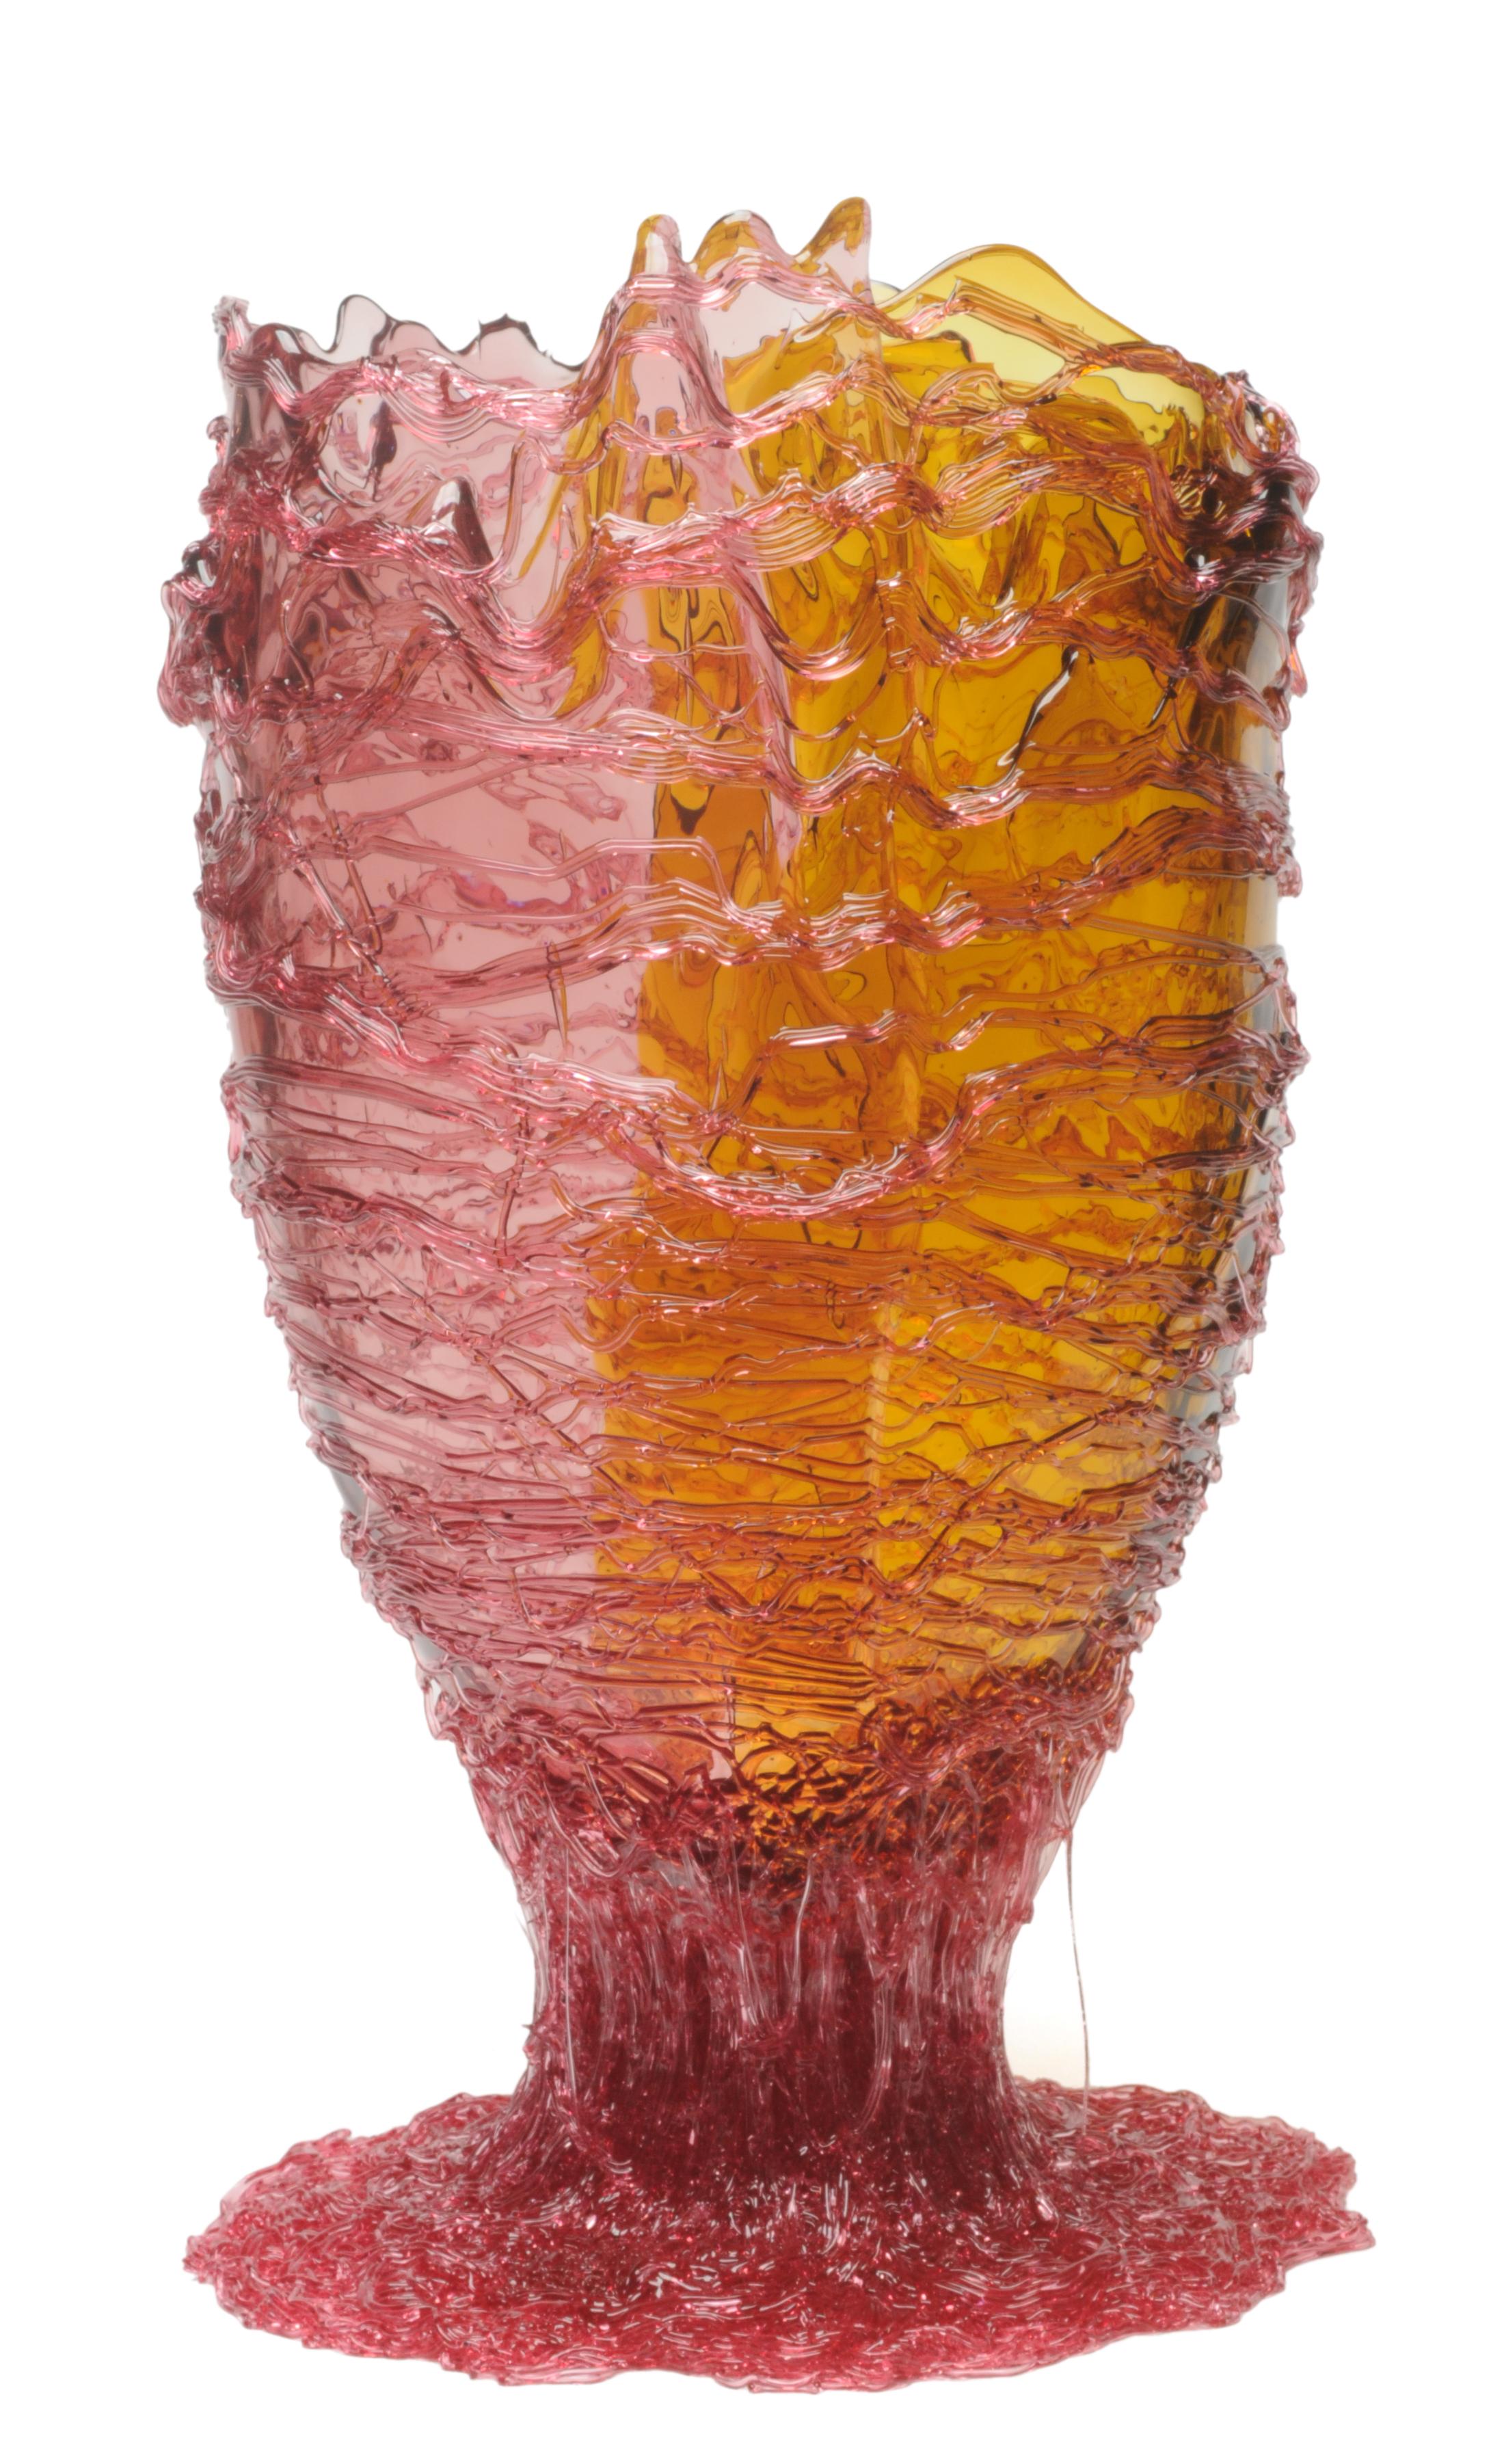 Spaghetti extra colour vase, clear pink, amber and fuchsia

Vase in soft resin designed by Gaetano Pesce in 1995 for Fish Design collection.

Measures: XL Ø 30cm x H 56cm

Colour: Clear clear pink, amber and fuchsia
Vase in soft resin designed by